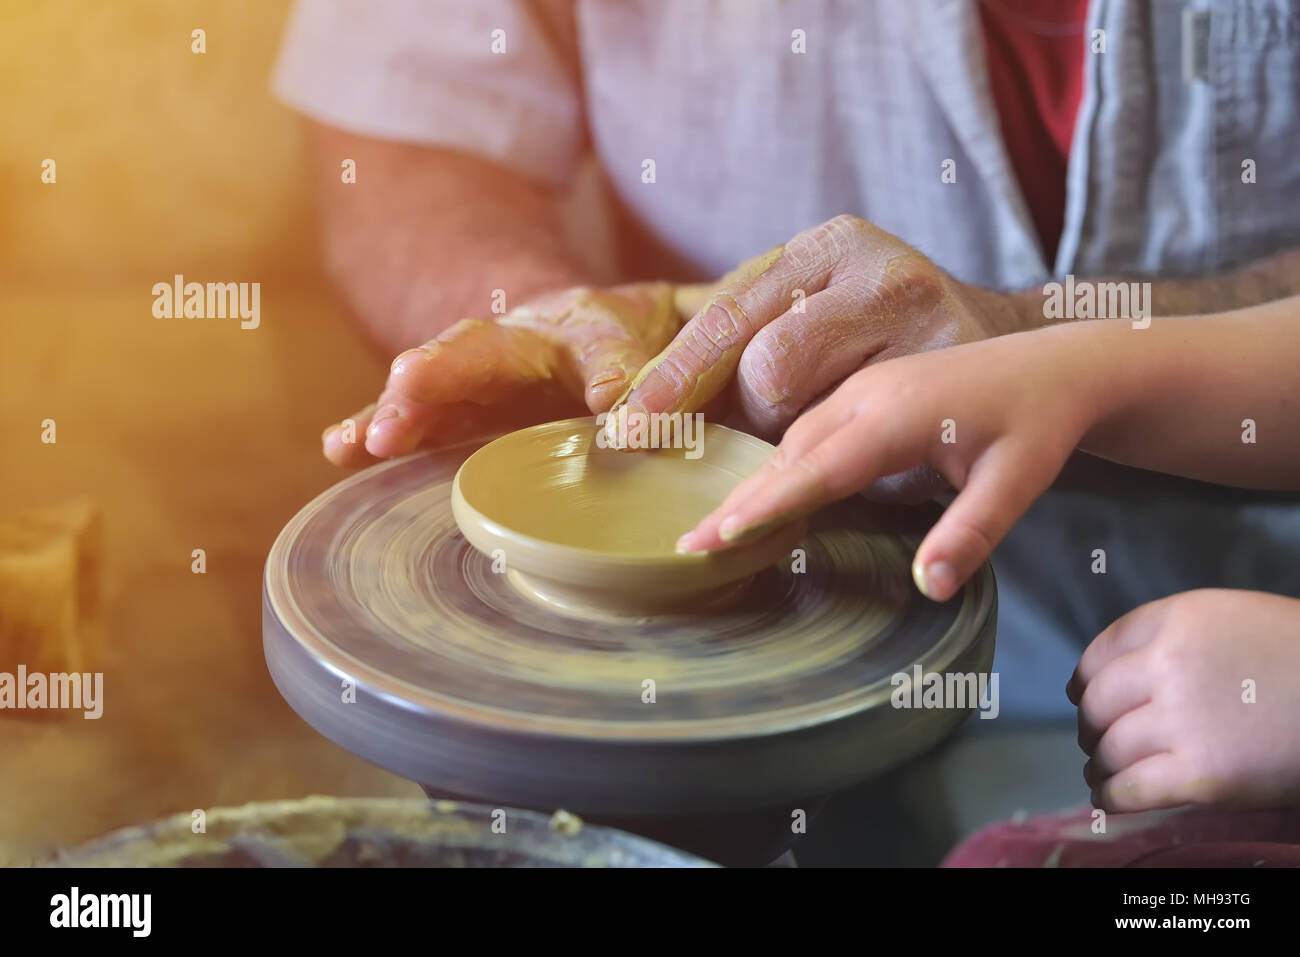 Creating a jar or vase of white clay close-up. Grandpa teaches grandson pottery, workshop, ceramics art concept. Twisted potter's wheel Stock Photo